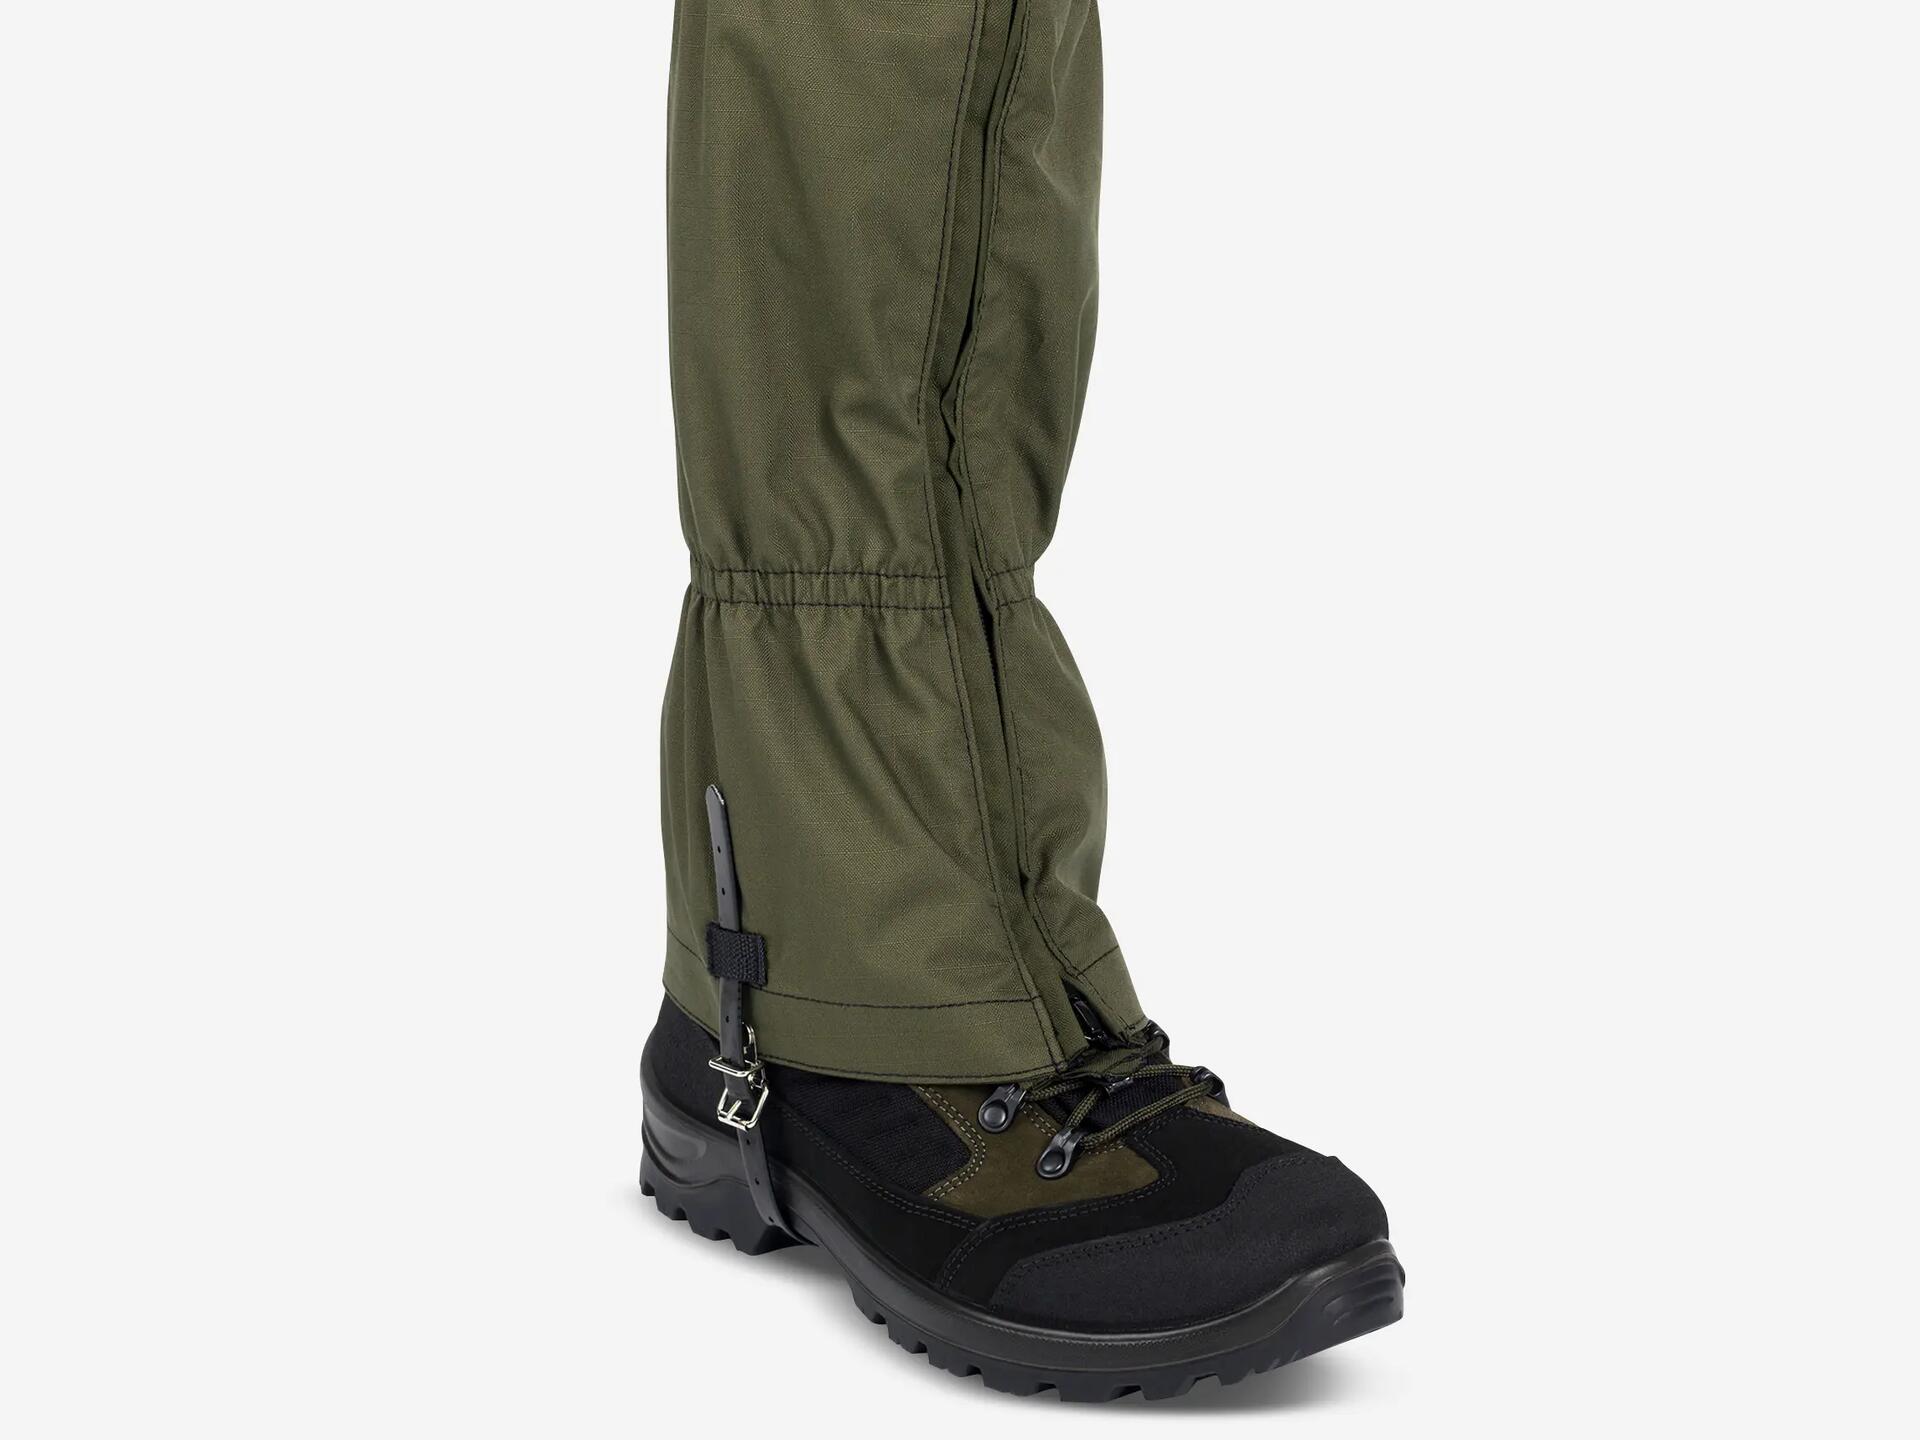 Gaiters for hunting